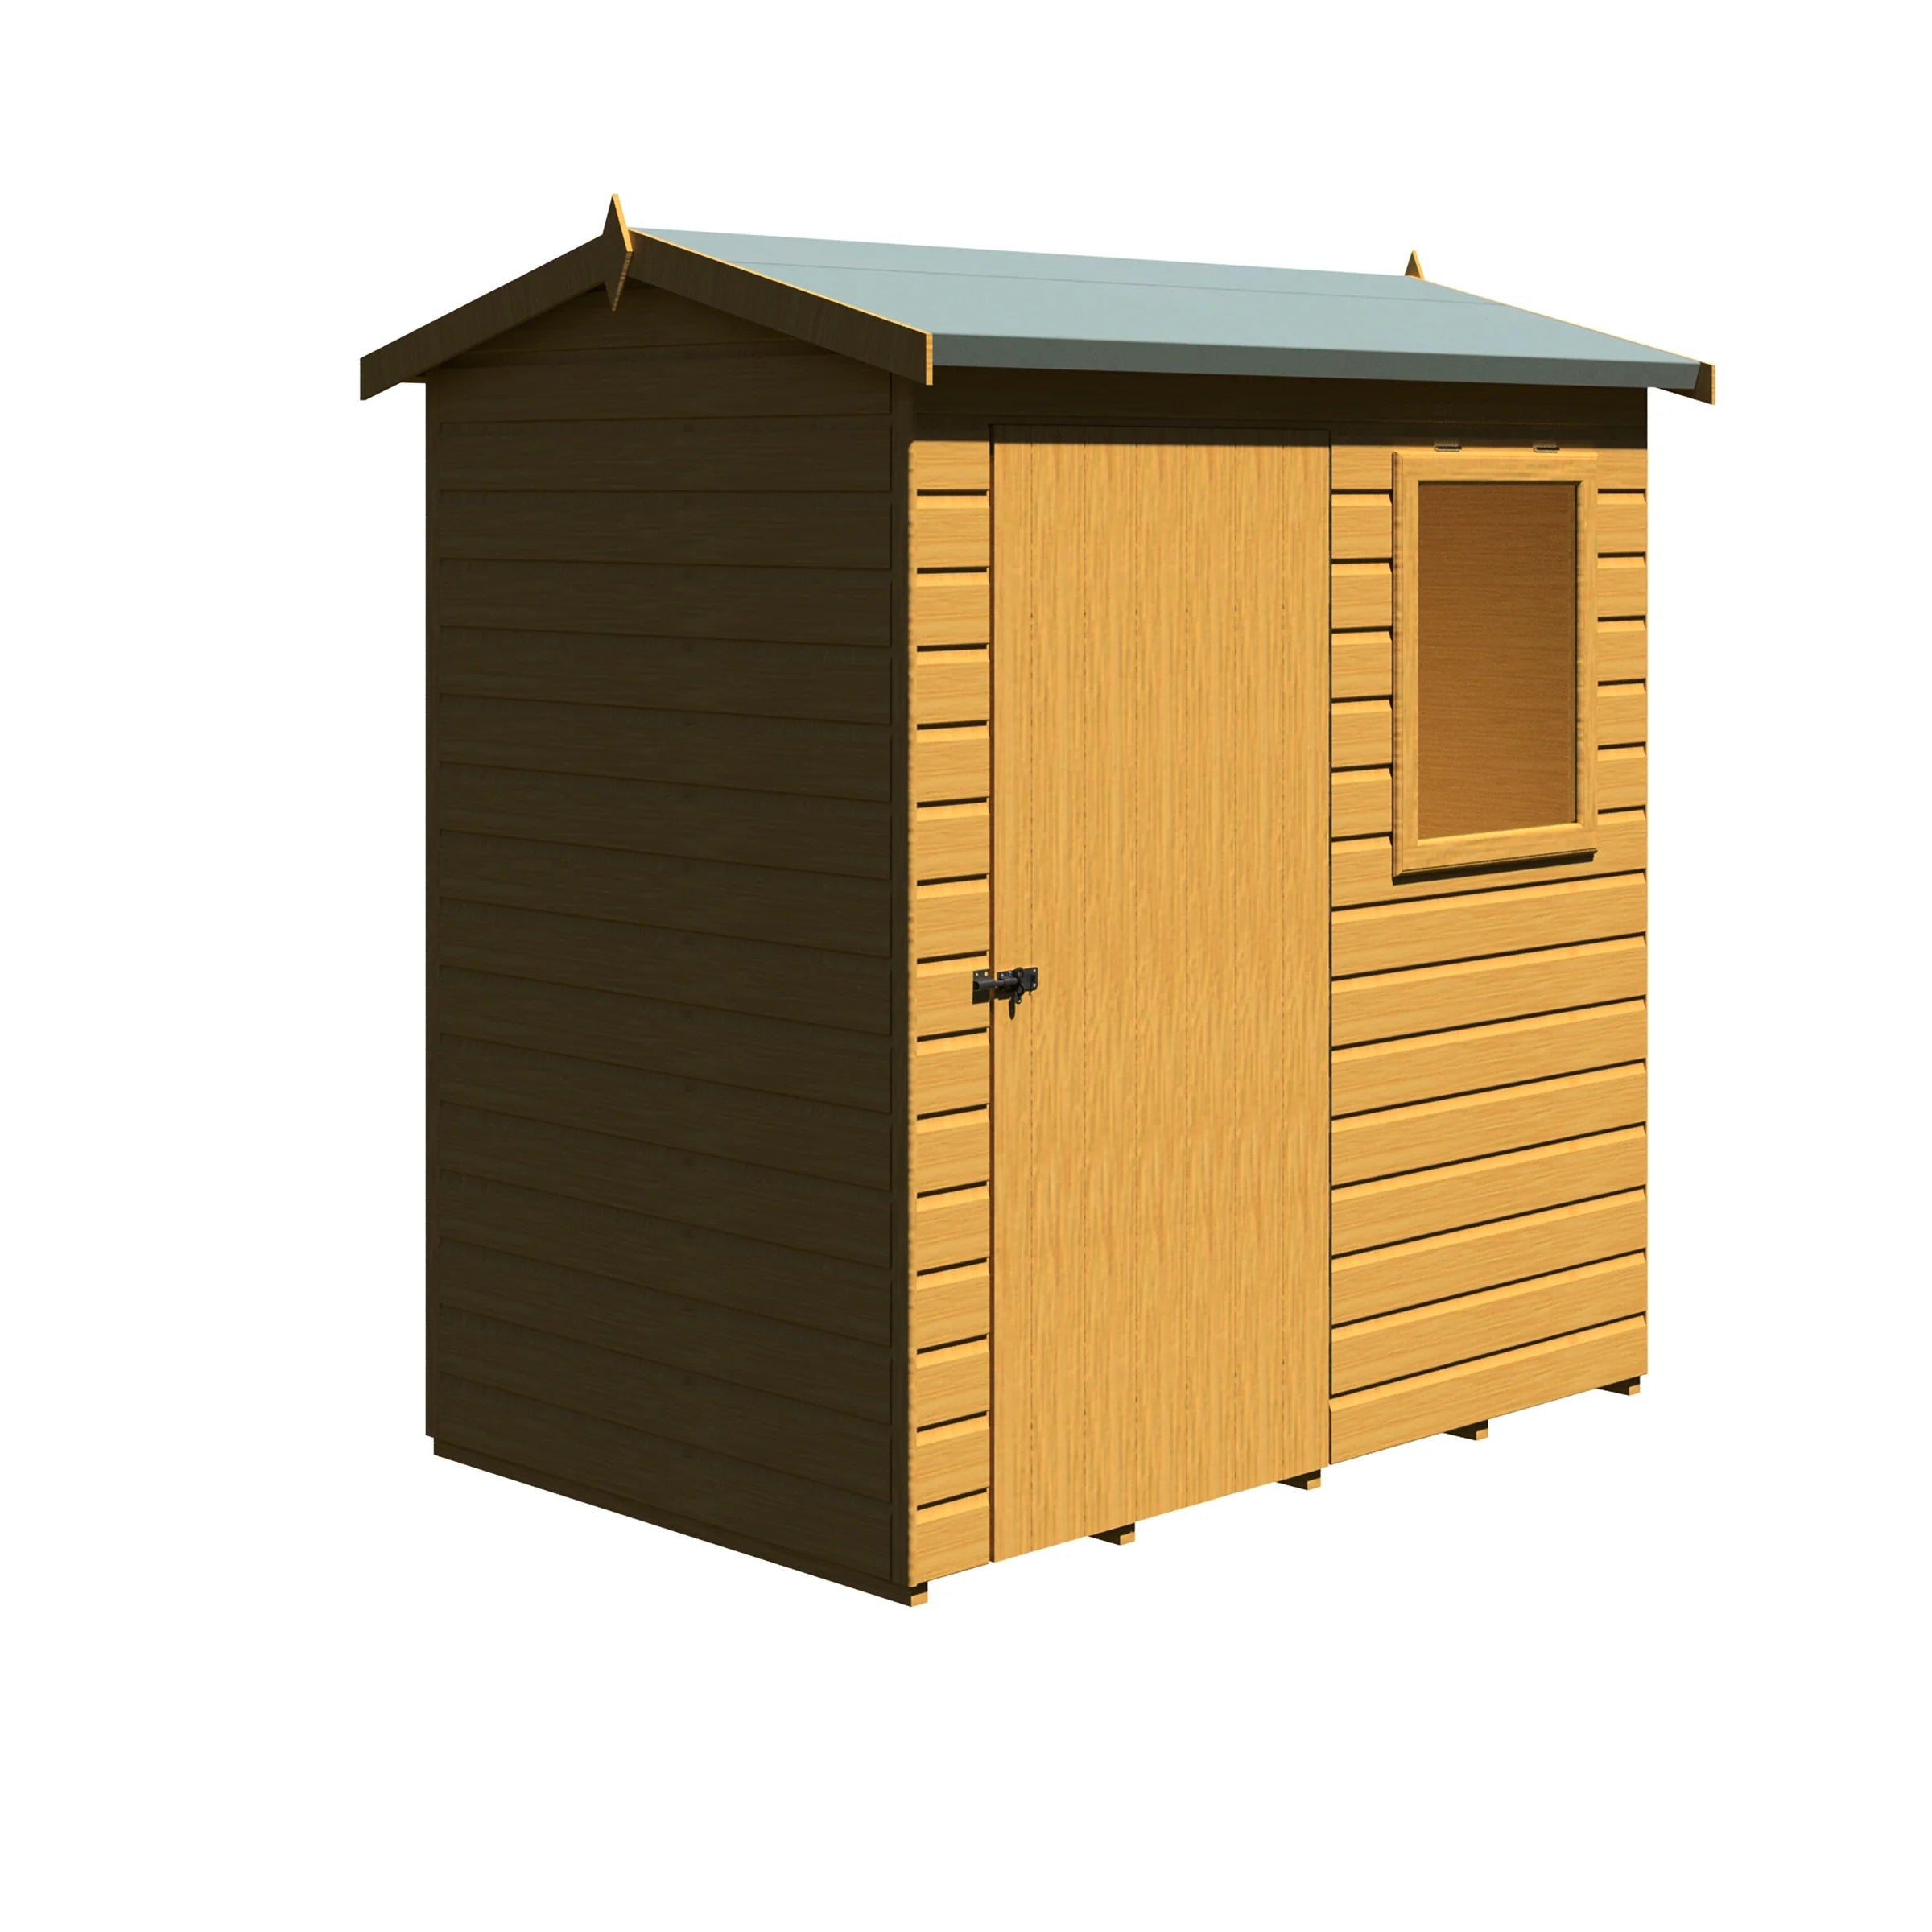 Shire Lewis Reverse Apex Style D Single Door Garden Shed 6x4